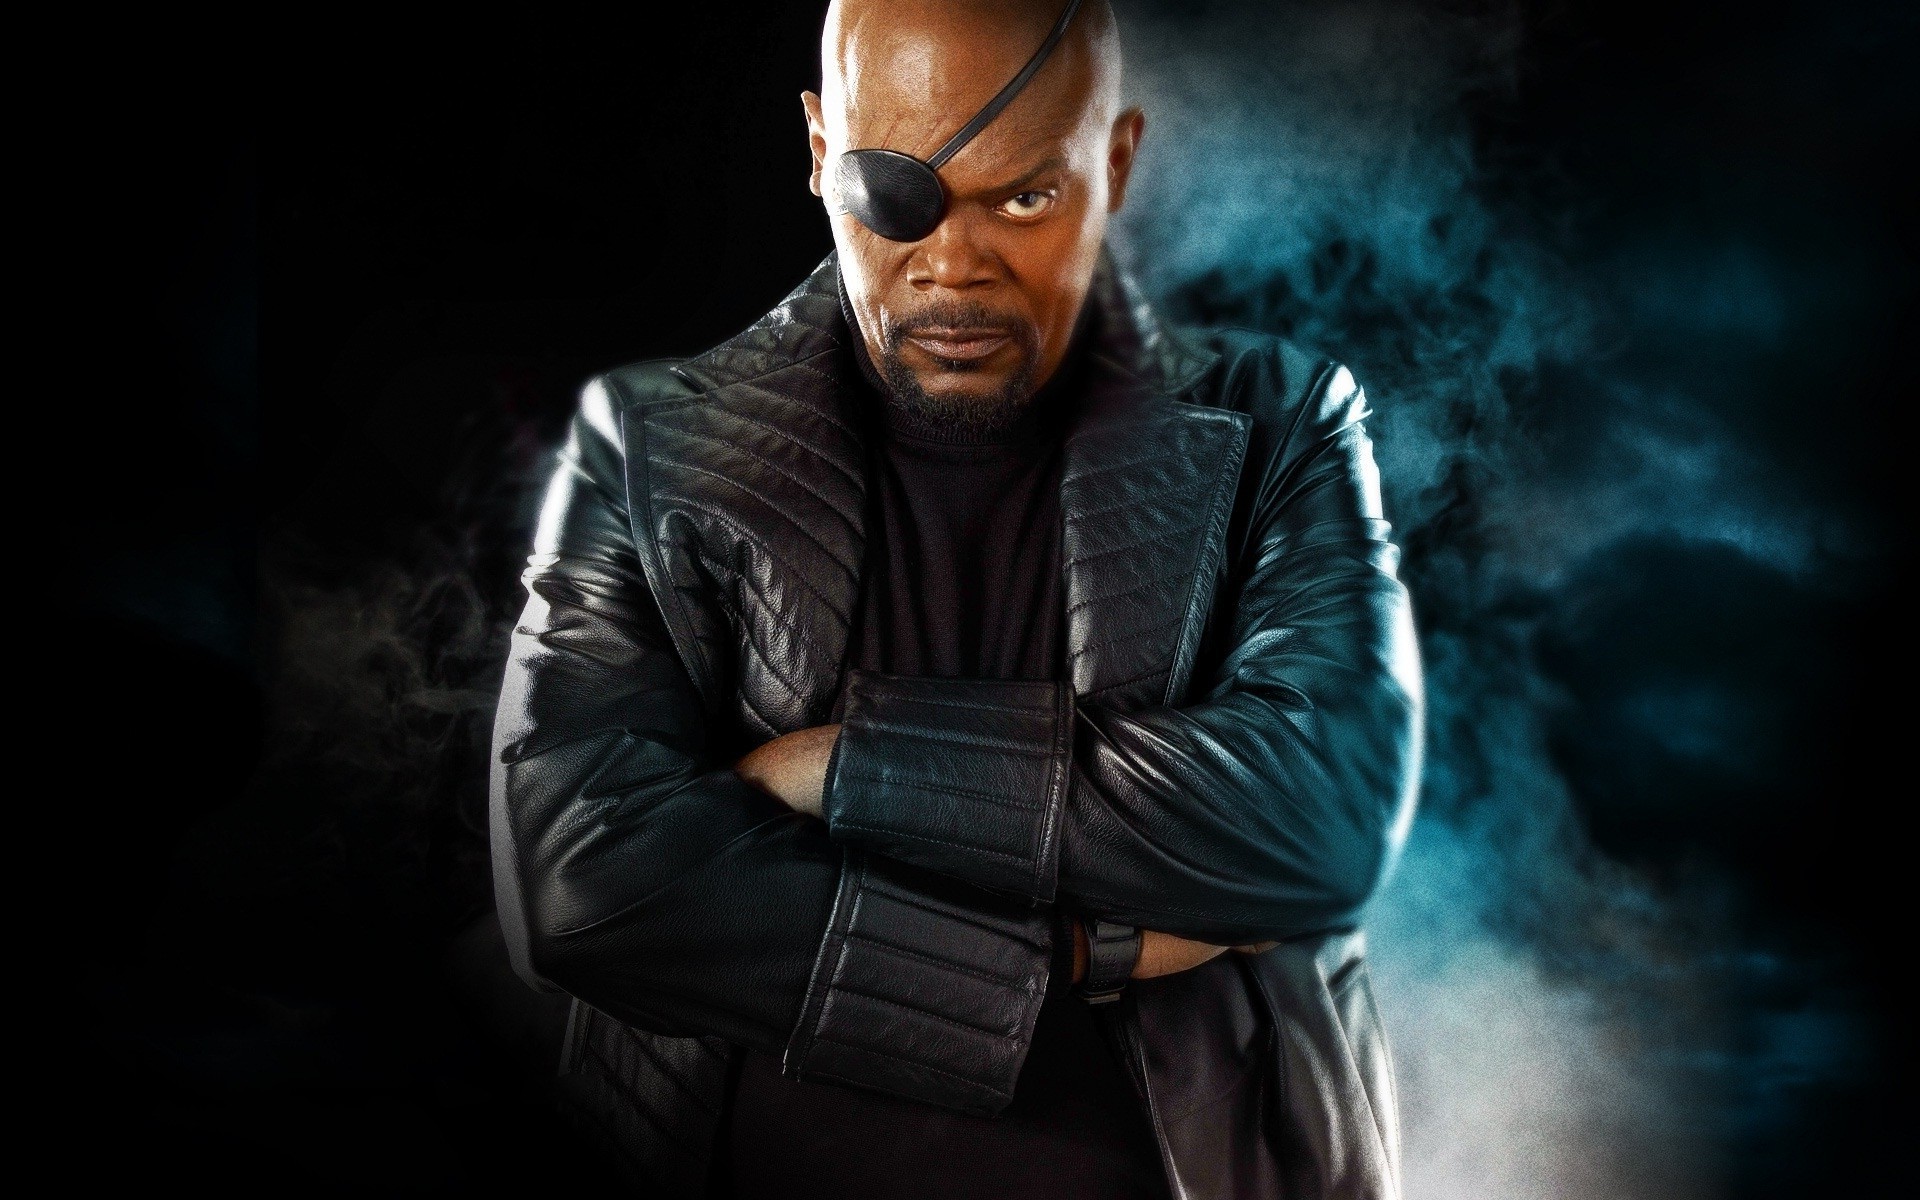 Nick Fury Captain America The Winter Soldier Wallpaper